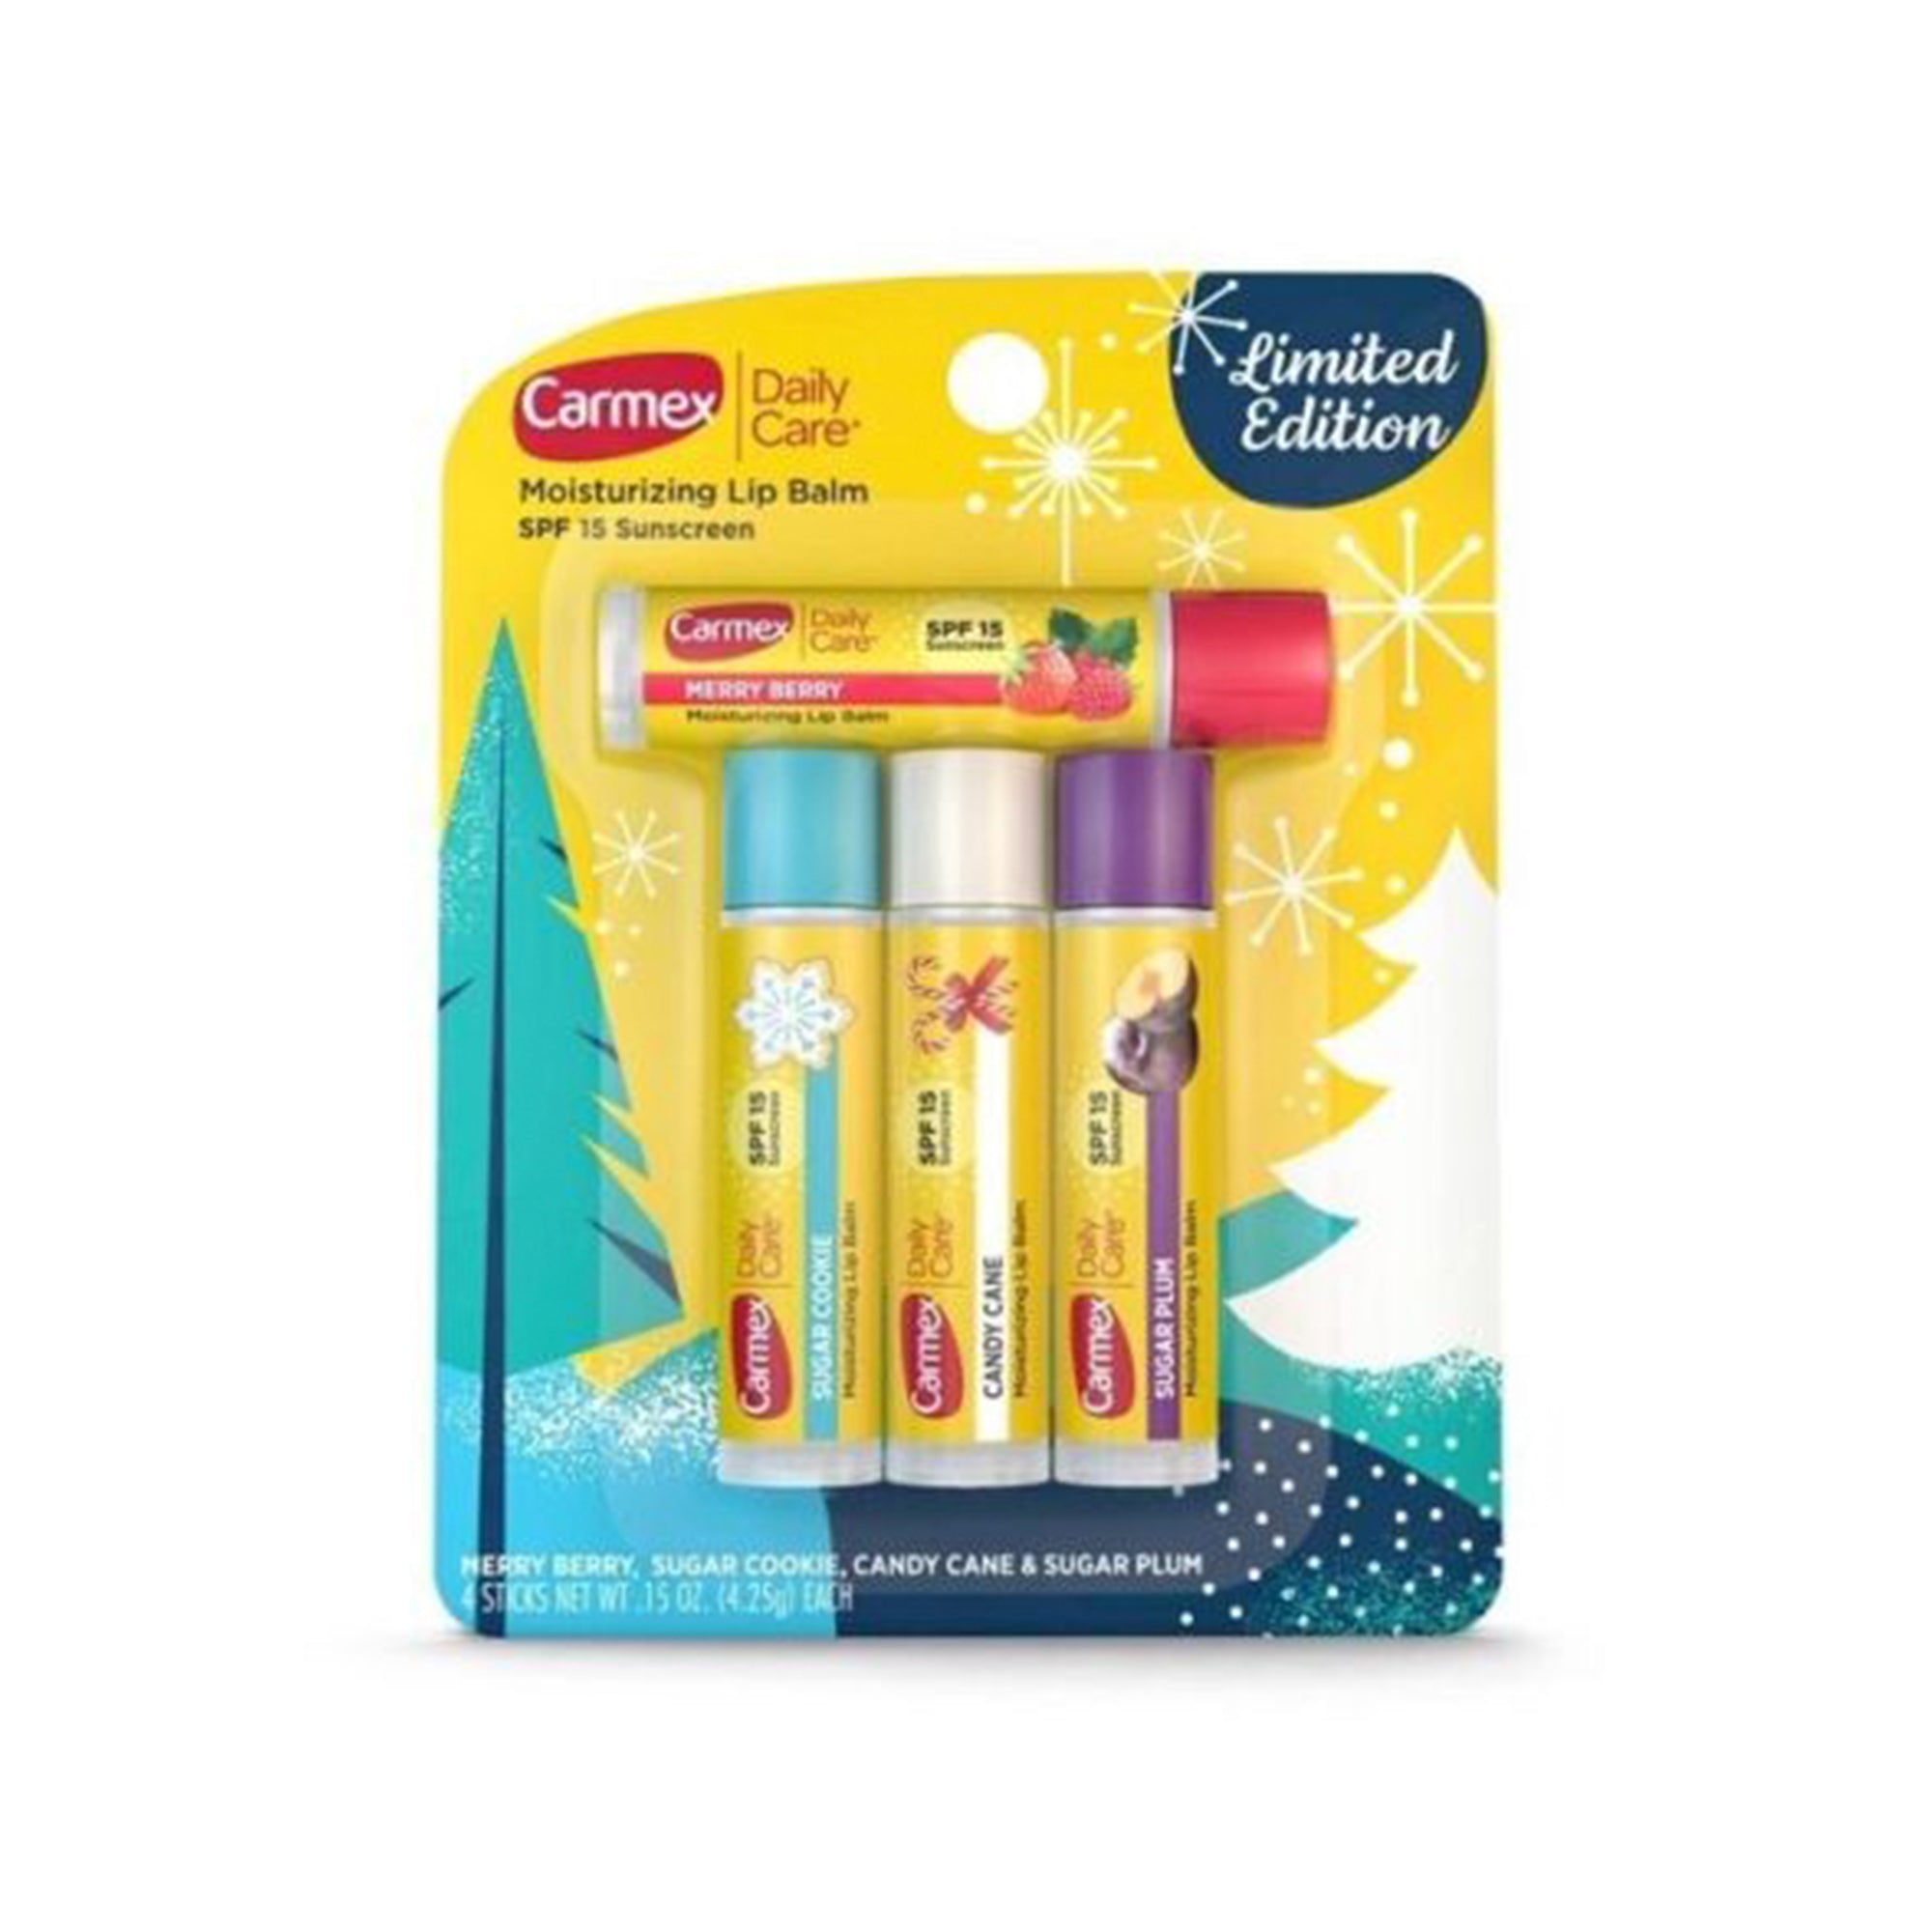 Carmex Daily Care Limited Edition HOLIDAY Lip Balm with SPF15 (Pack of 4 Sticks)